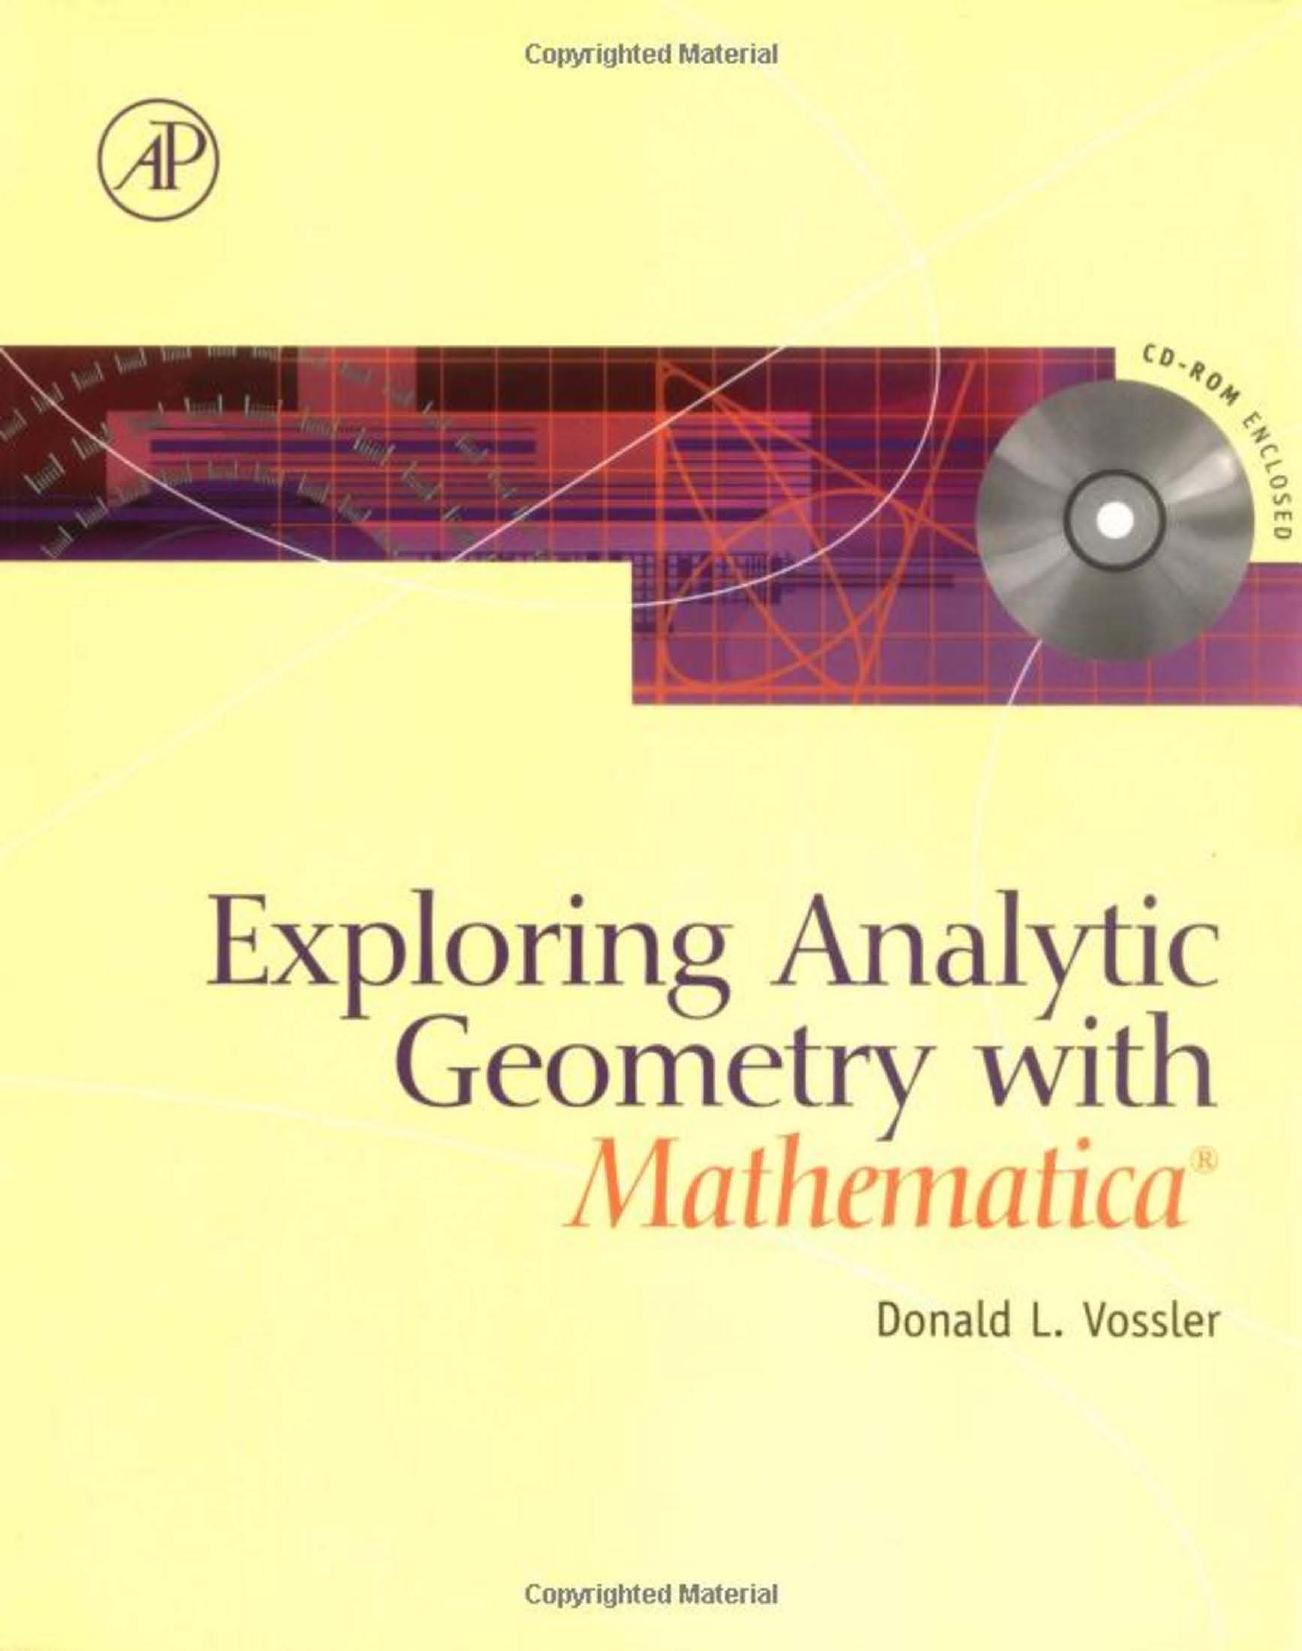 Exploring Analytical Geometry with Mathematica®